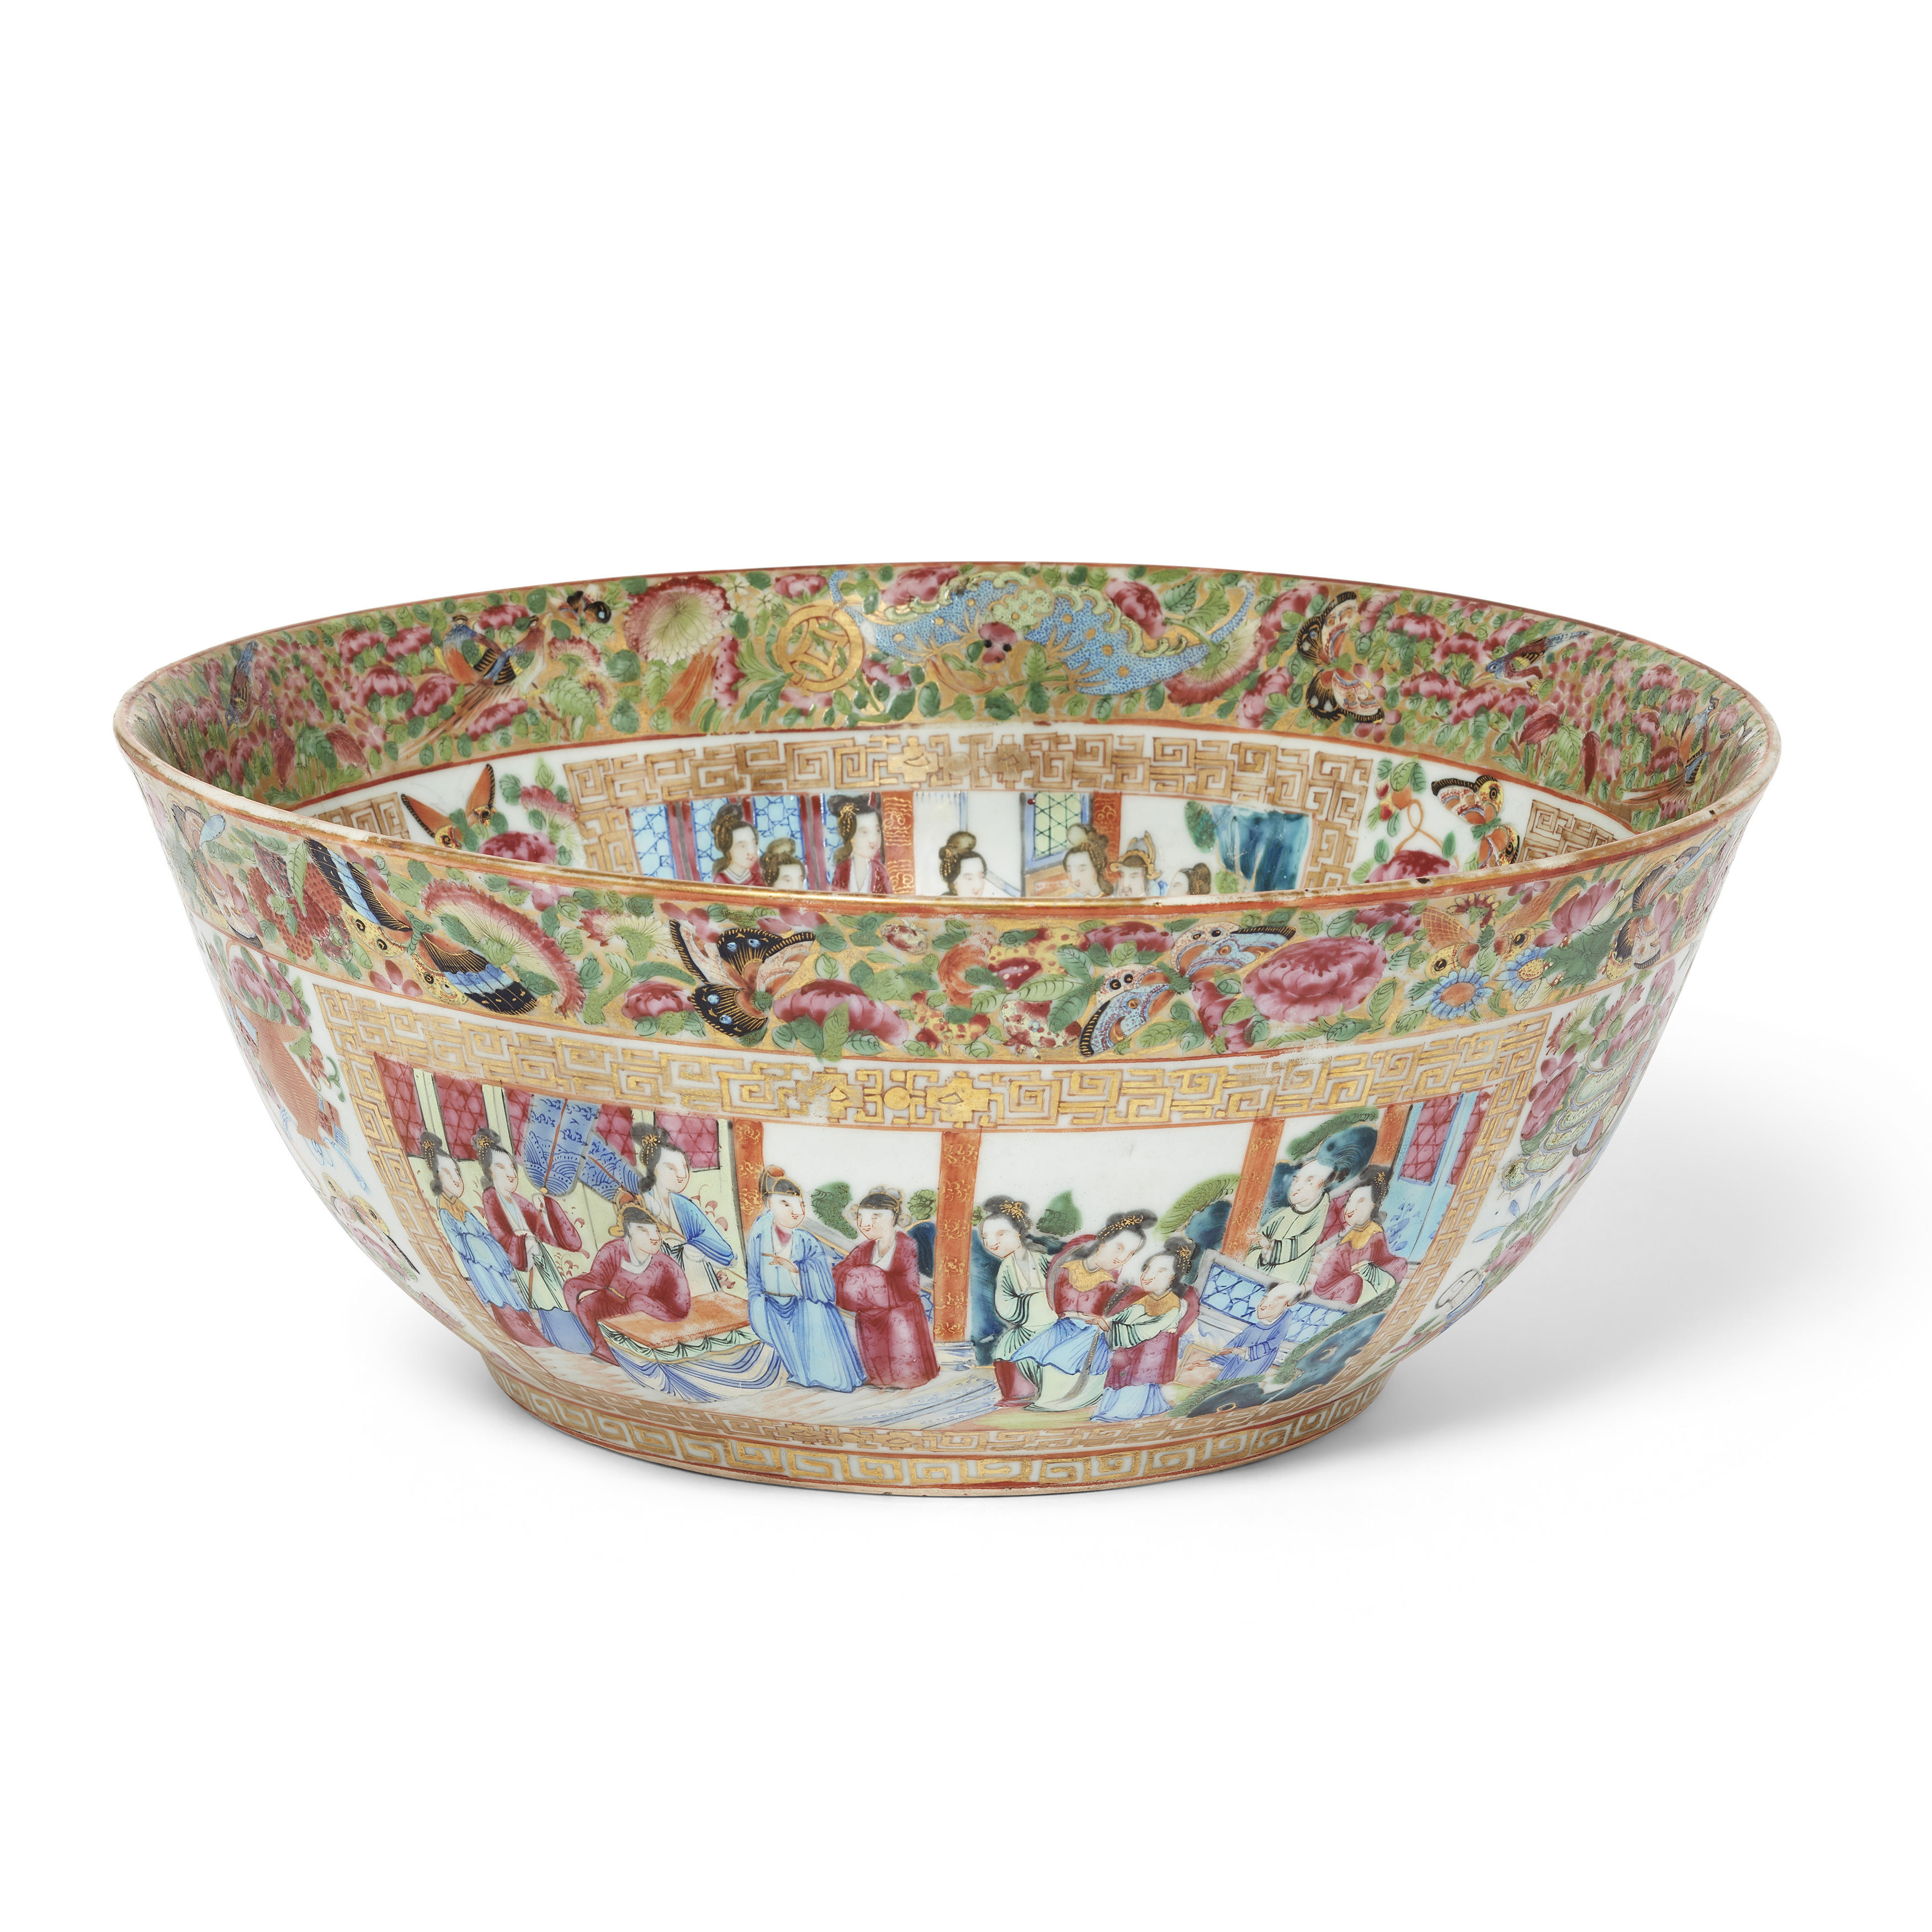 A large Chinese 'Canton' famille rose punch bowl, Qing dynasty, 19th century, enamelled and gilt ...